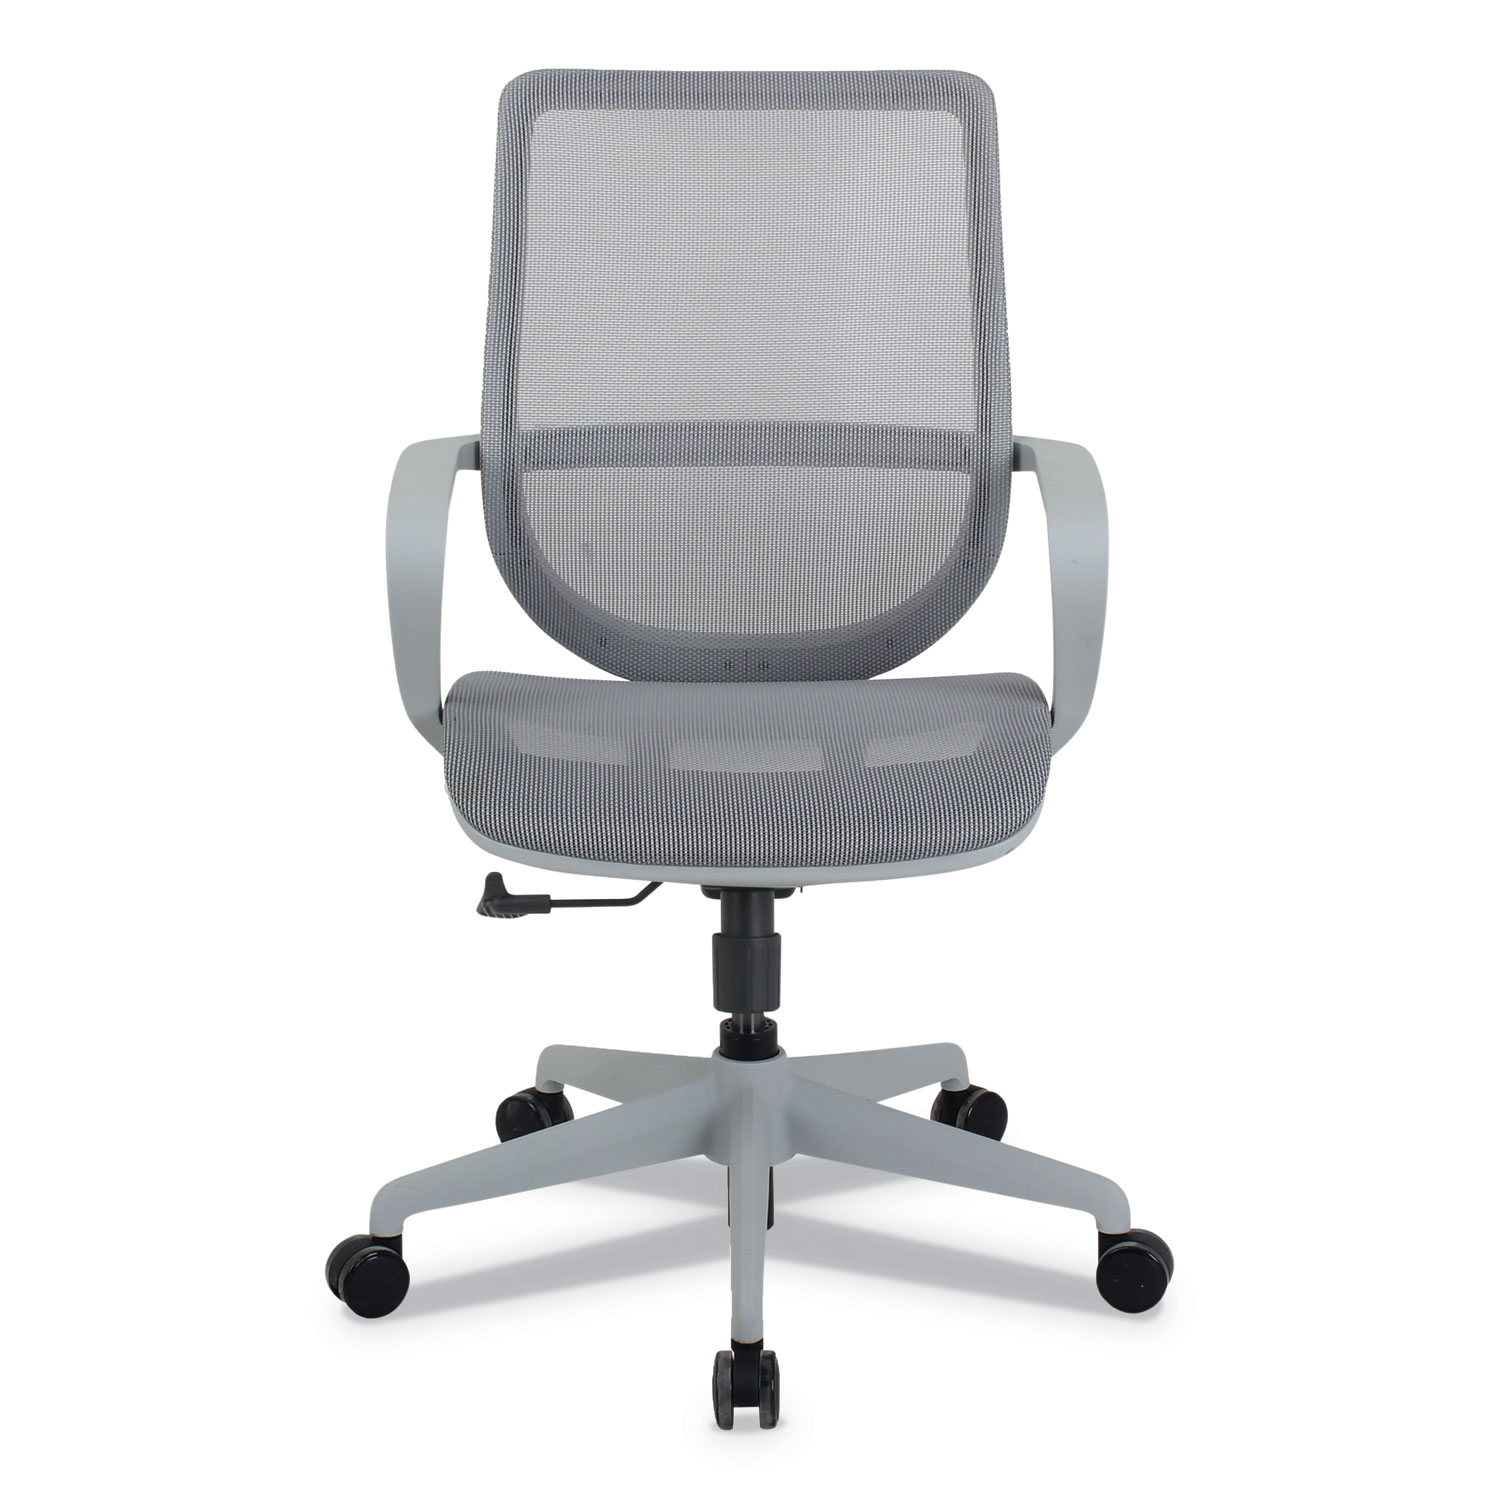 kathy ireland OFFICE by Alera Macklin Series Mid-Back All-Mesh Office Chair, Up to 275 lbs., Silver Seat/Back, Pewter Base